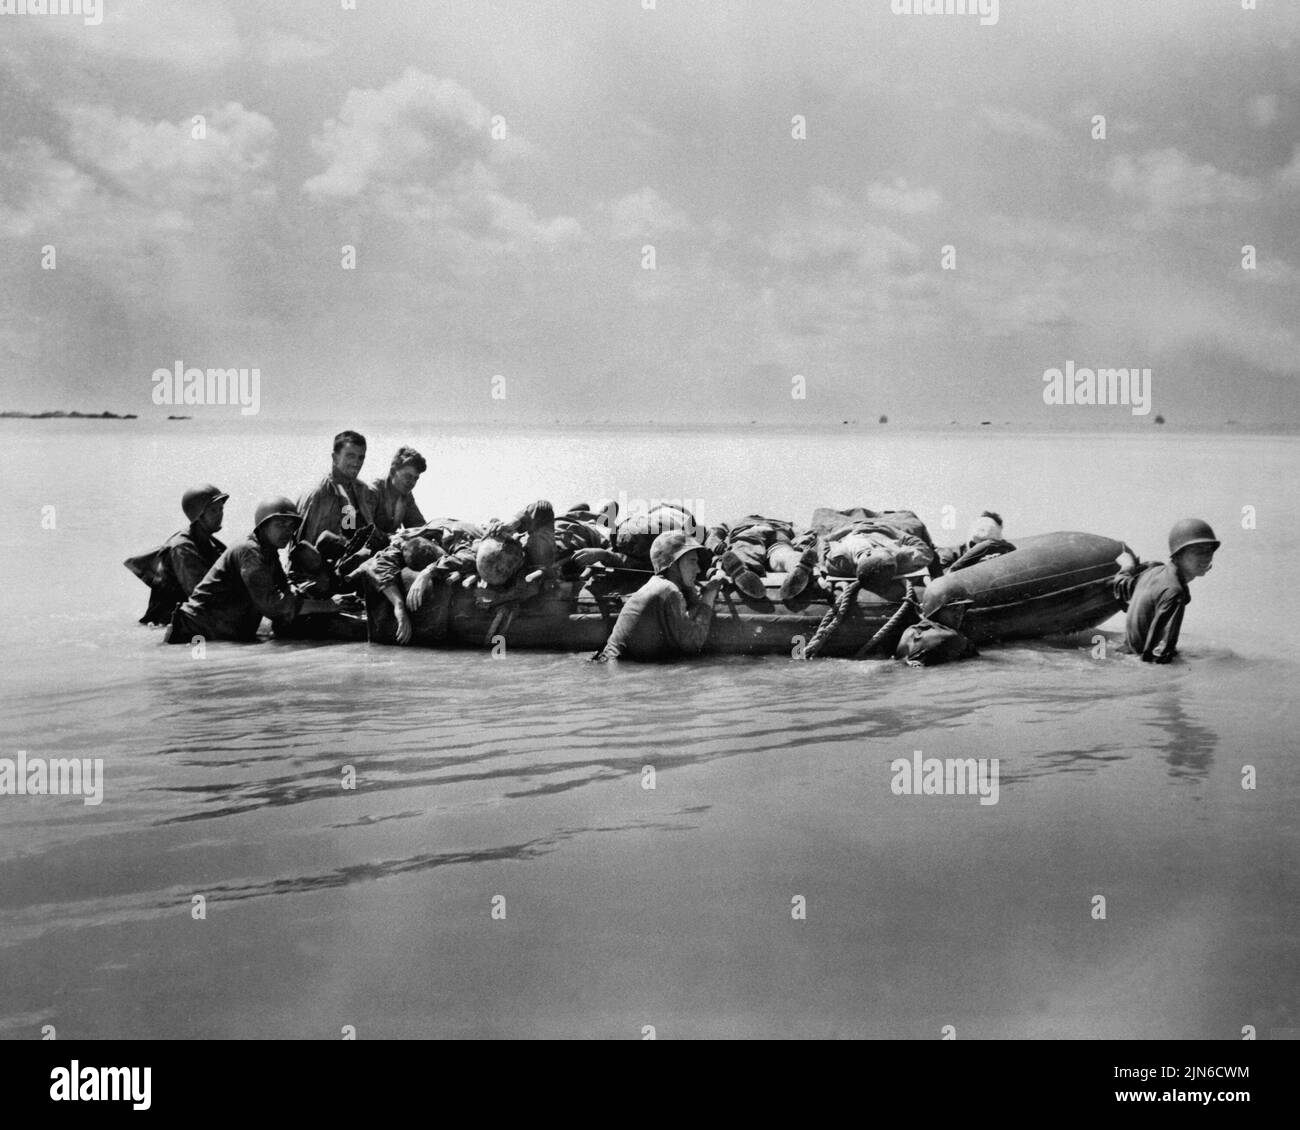 TARAWA, PACIFIC OCEAN - November 1943 - US Marines wounded during the landing on Tarawa are towed out on rubber boats by their buddies to larger vesse Stock Photo